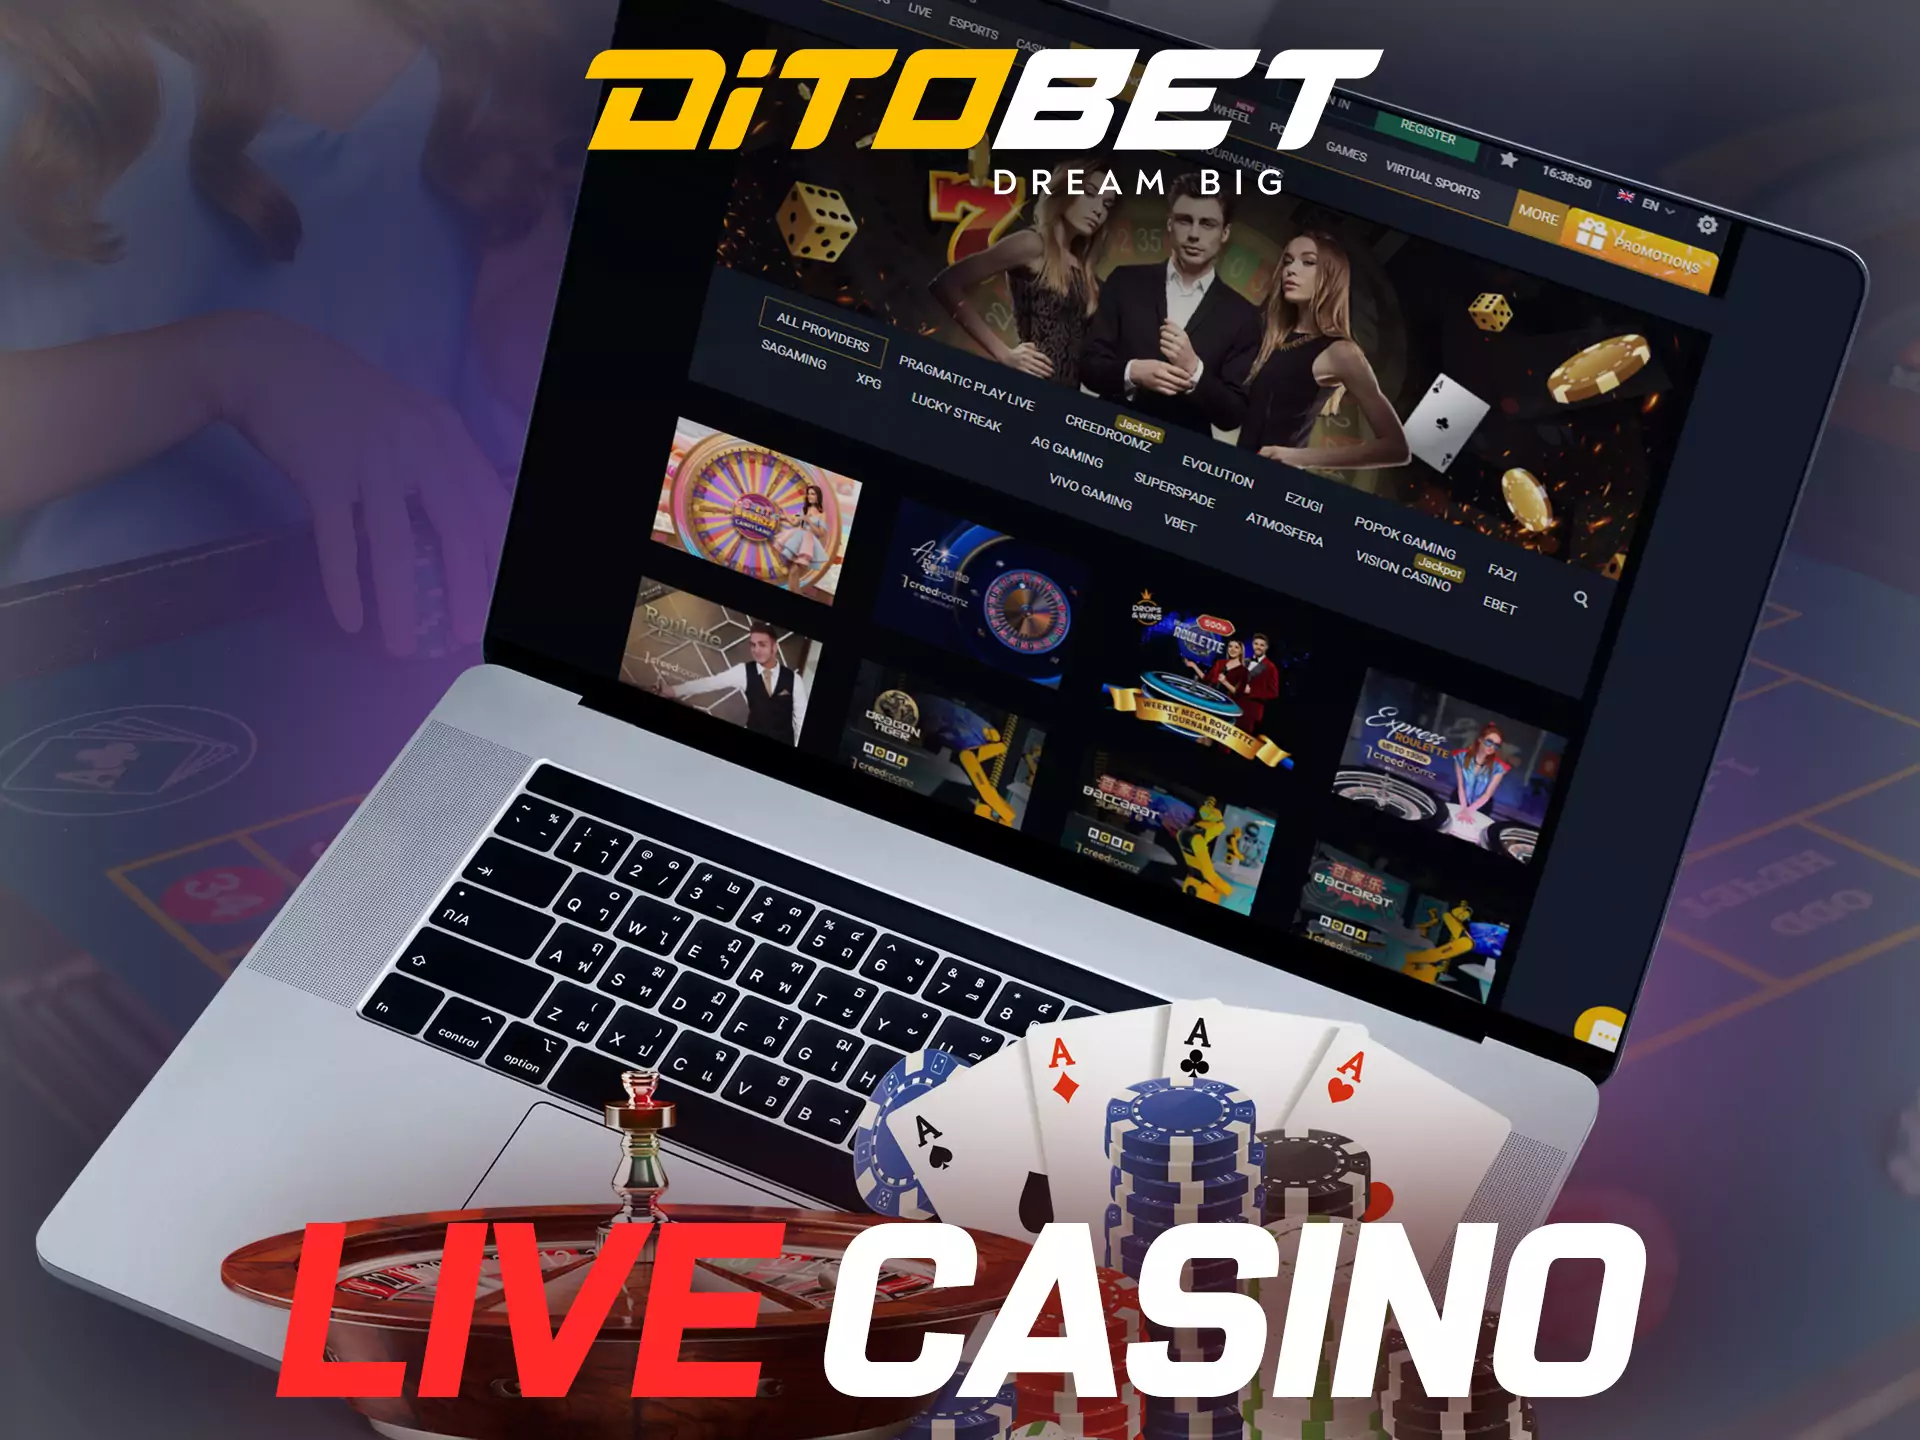 Play your favorite games at the Ditobet live casino.